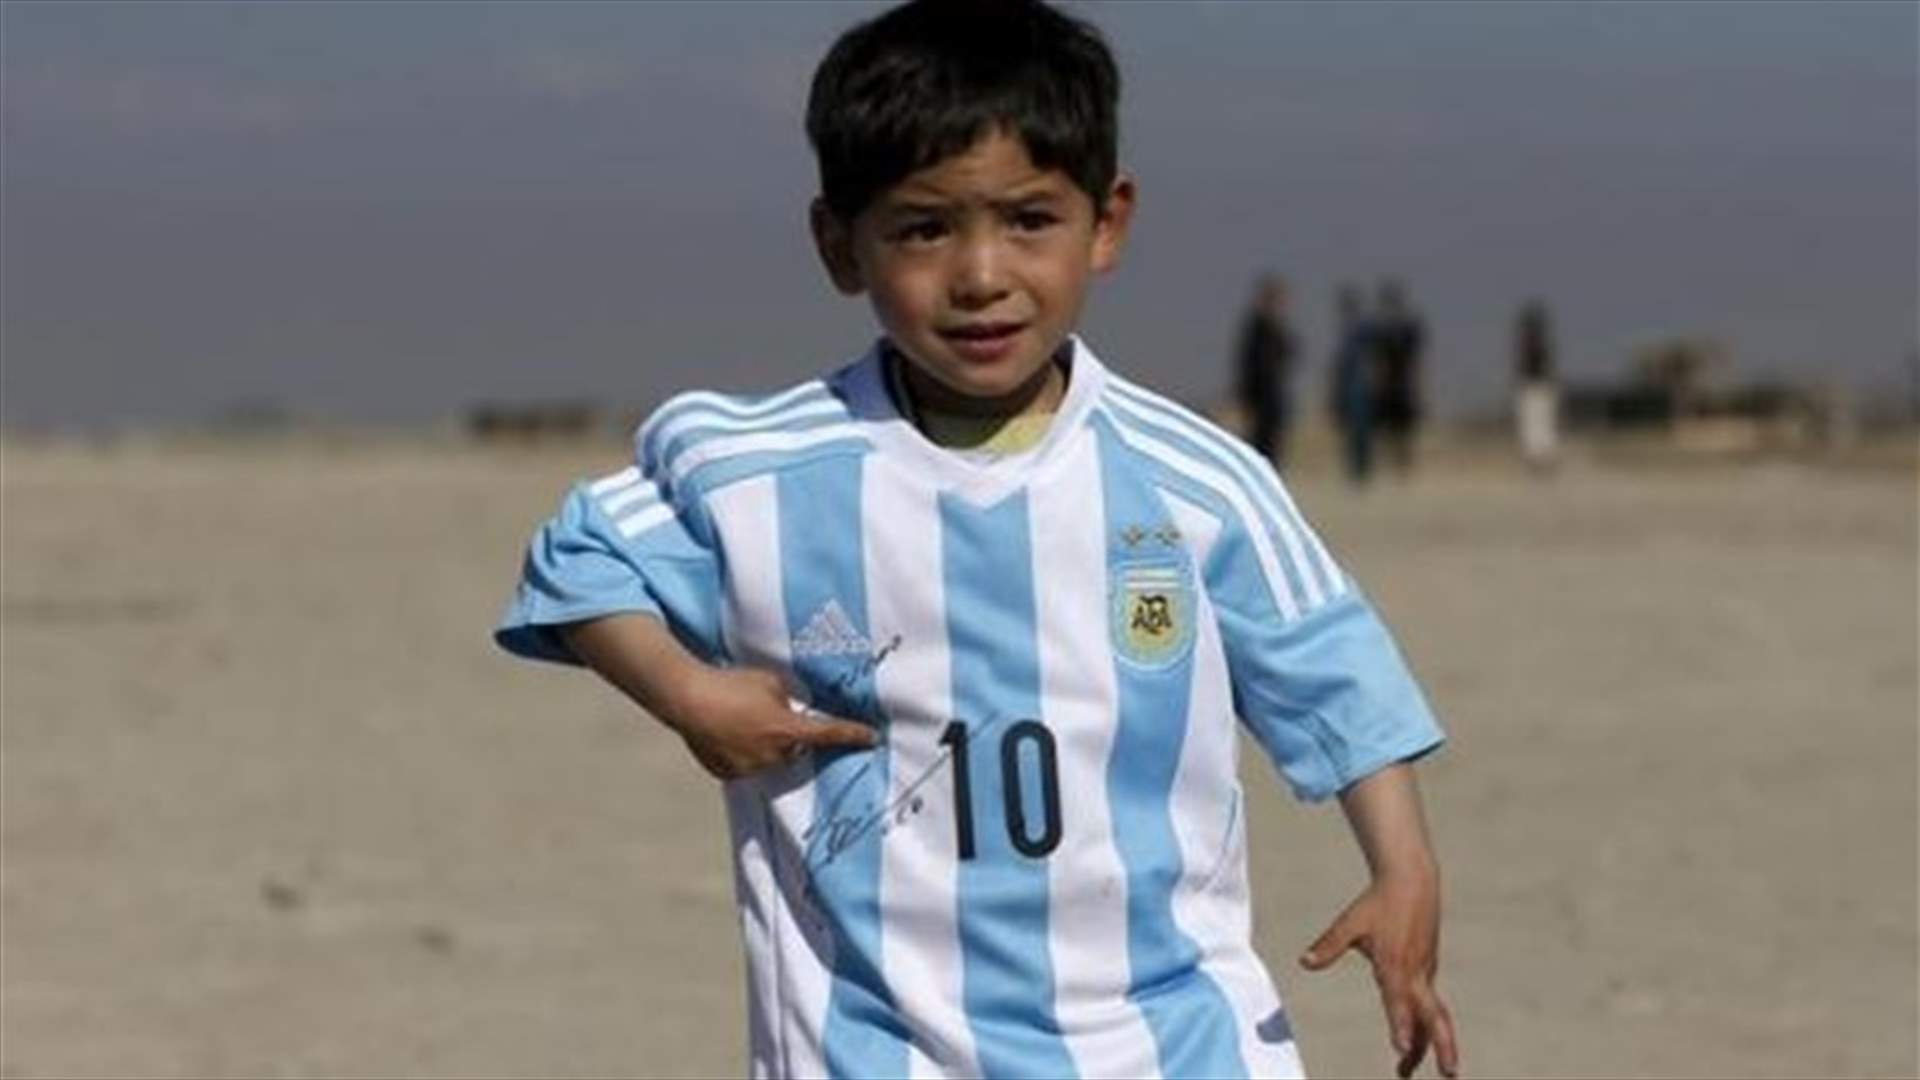 Young Afghan Messi fan flees over kidnap fears